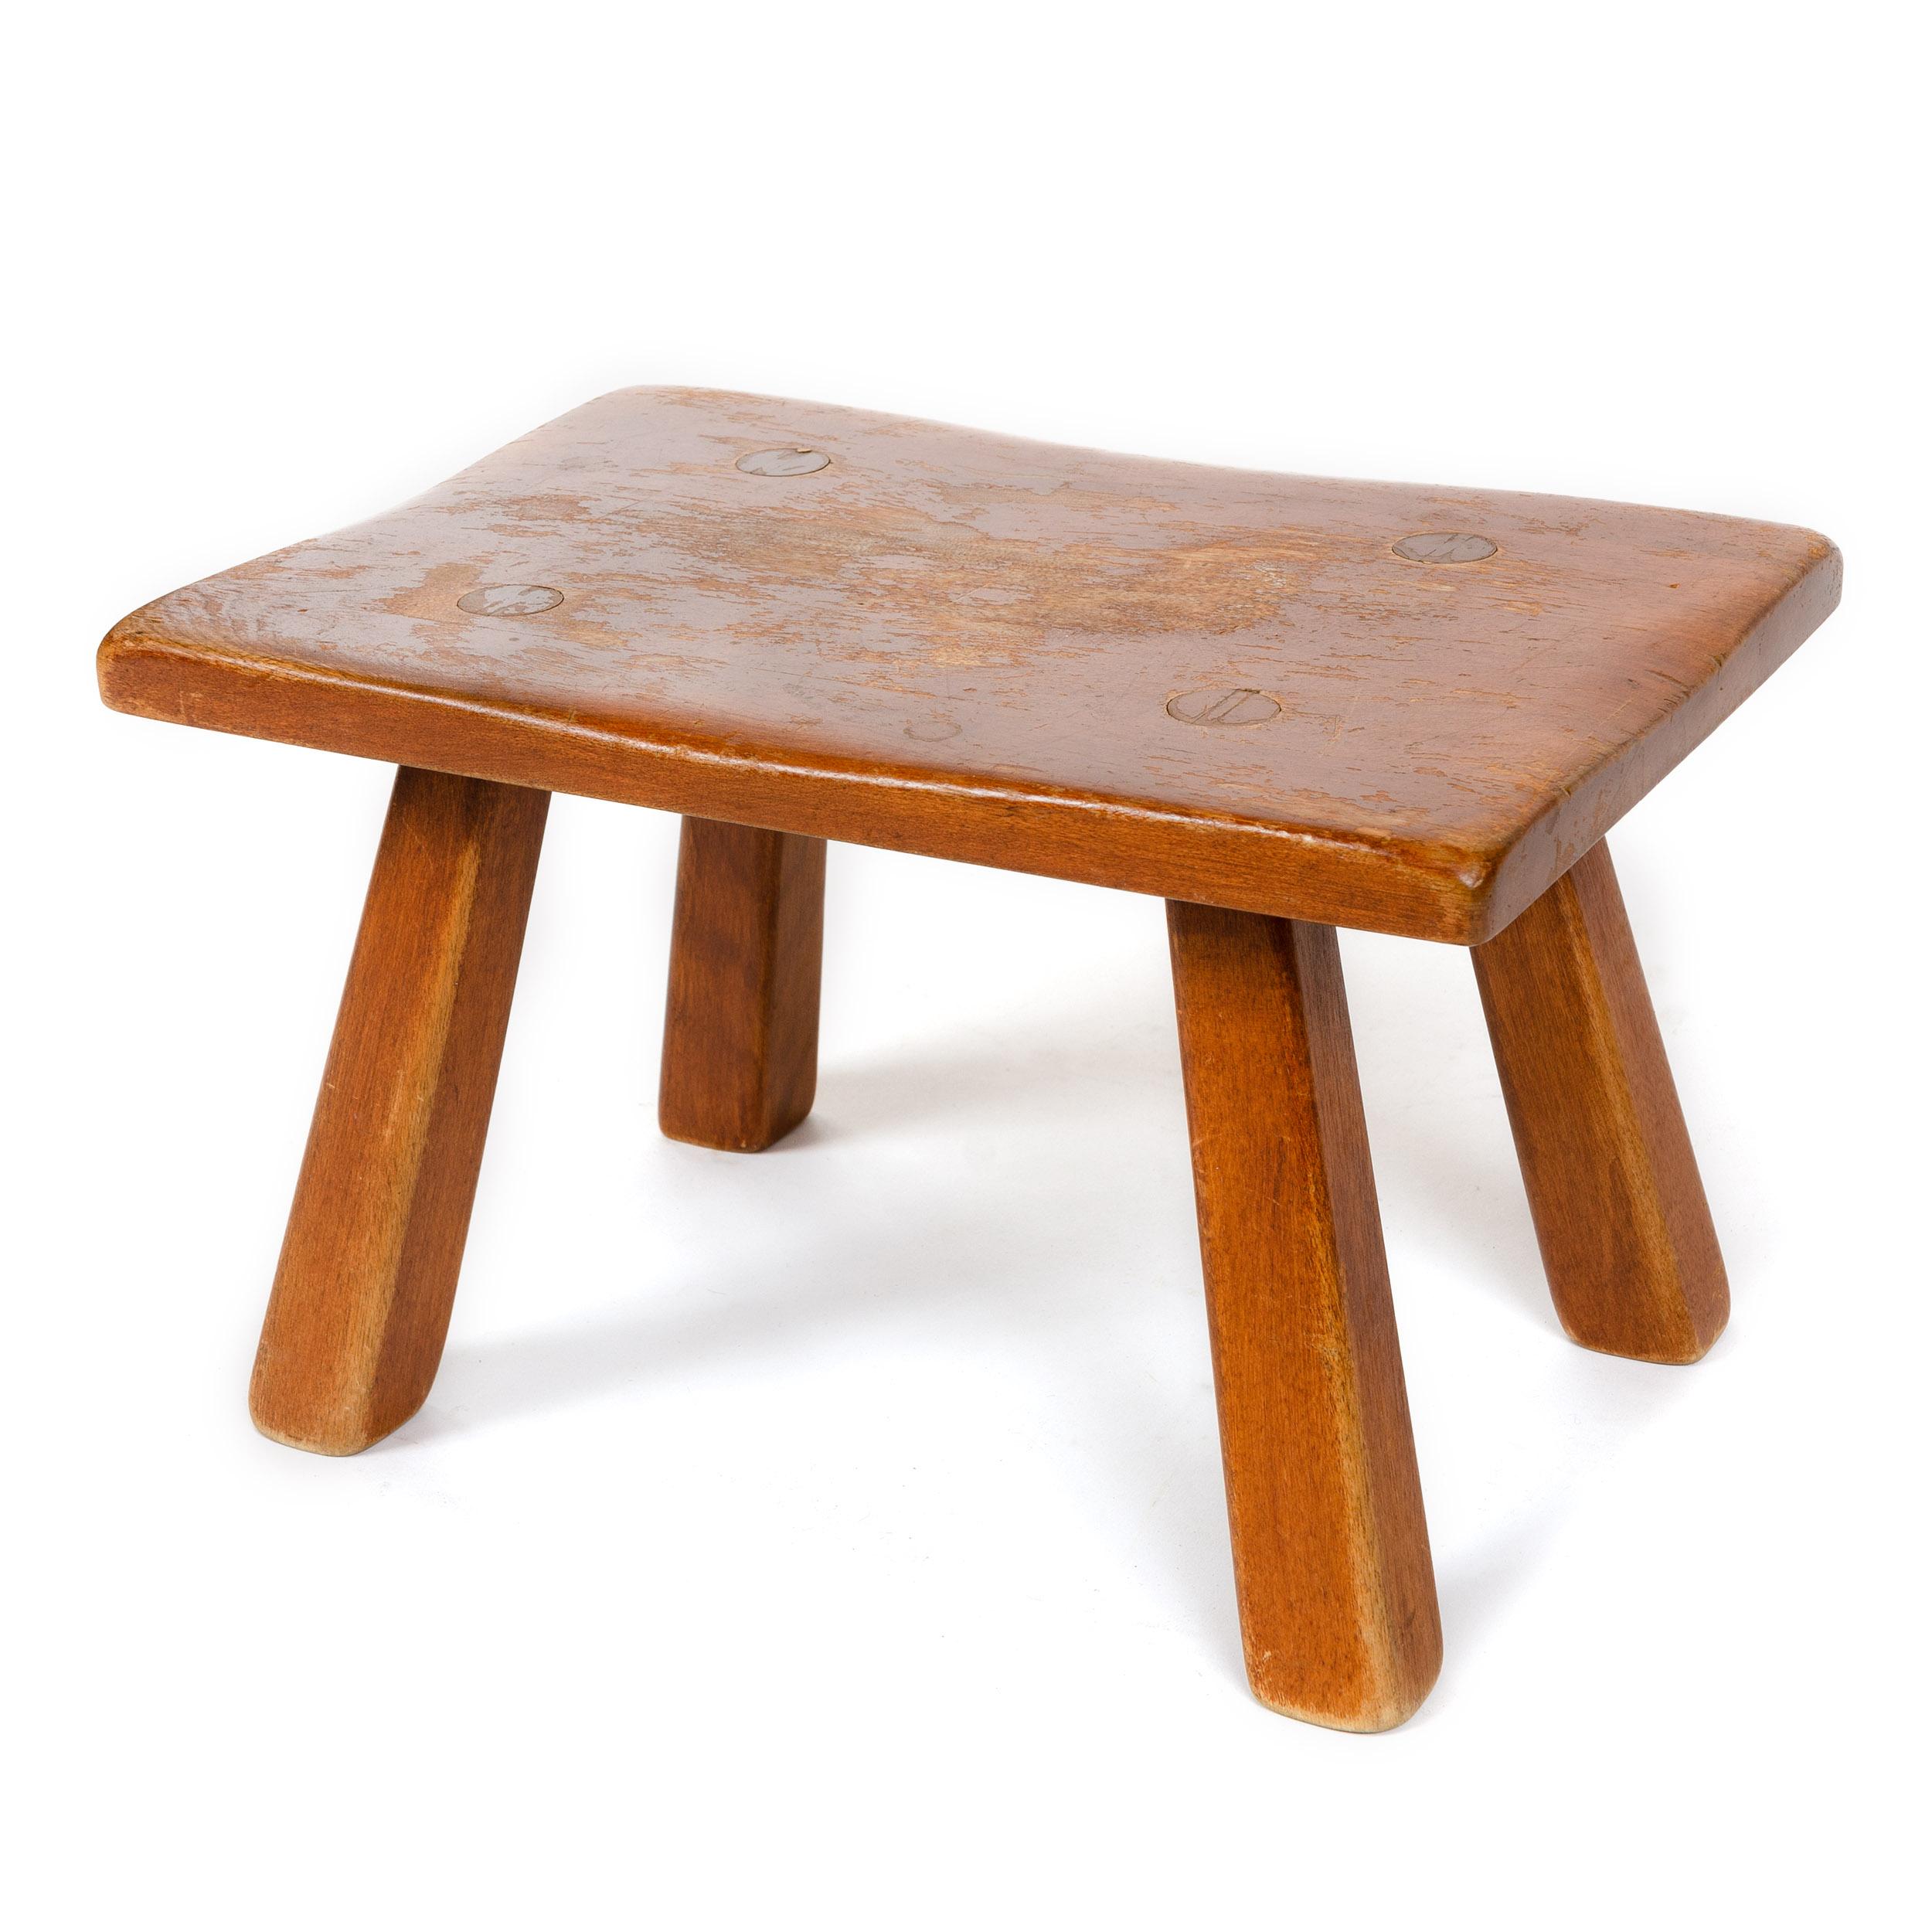 A stool in solid yellow birch with an organically shaped top and splayed legs, from the 'Colonial Creations' series.